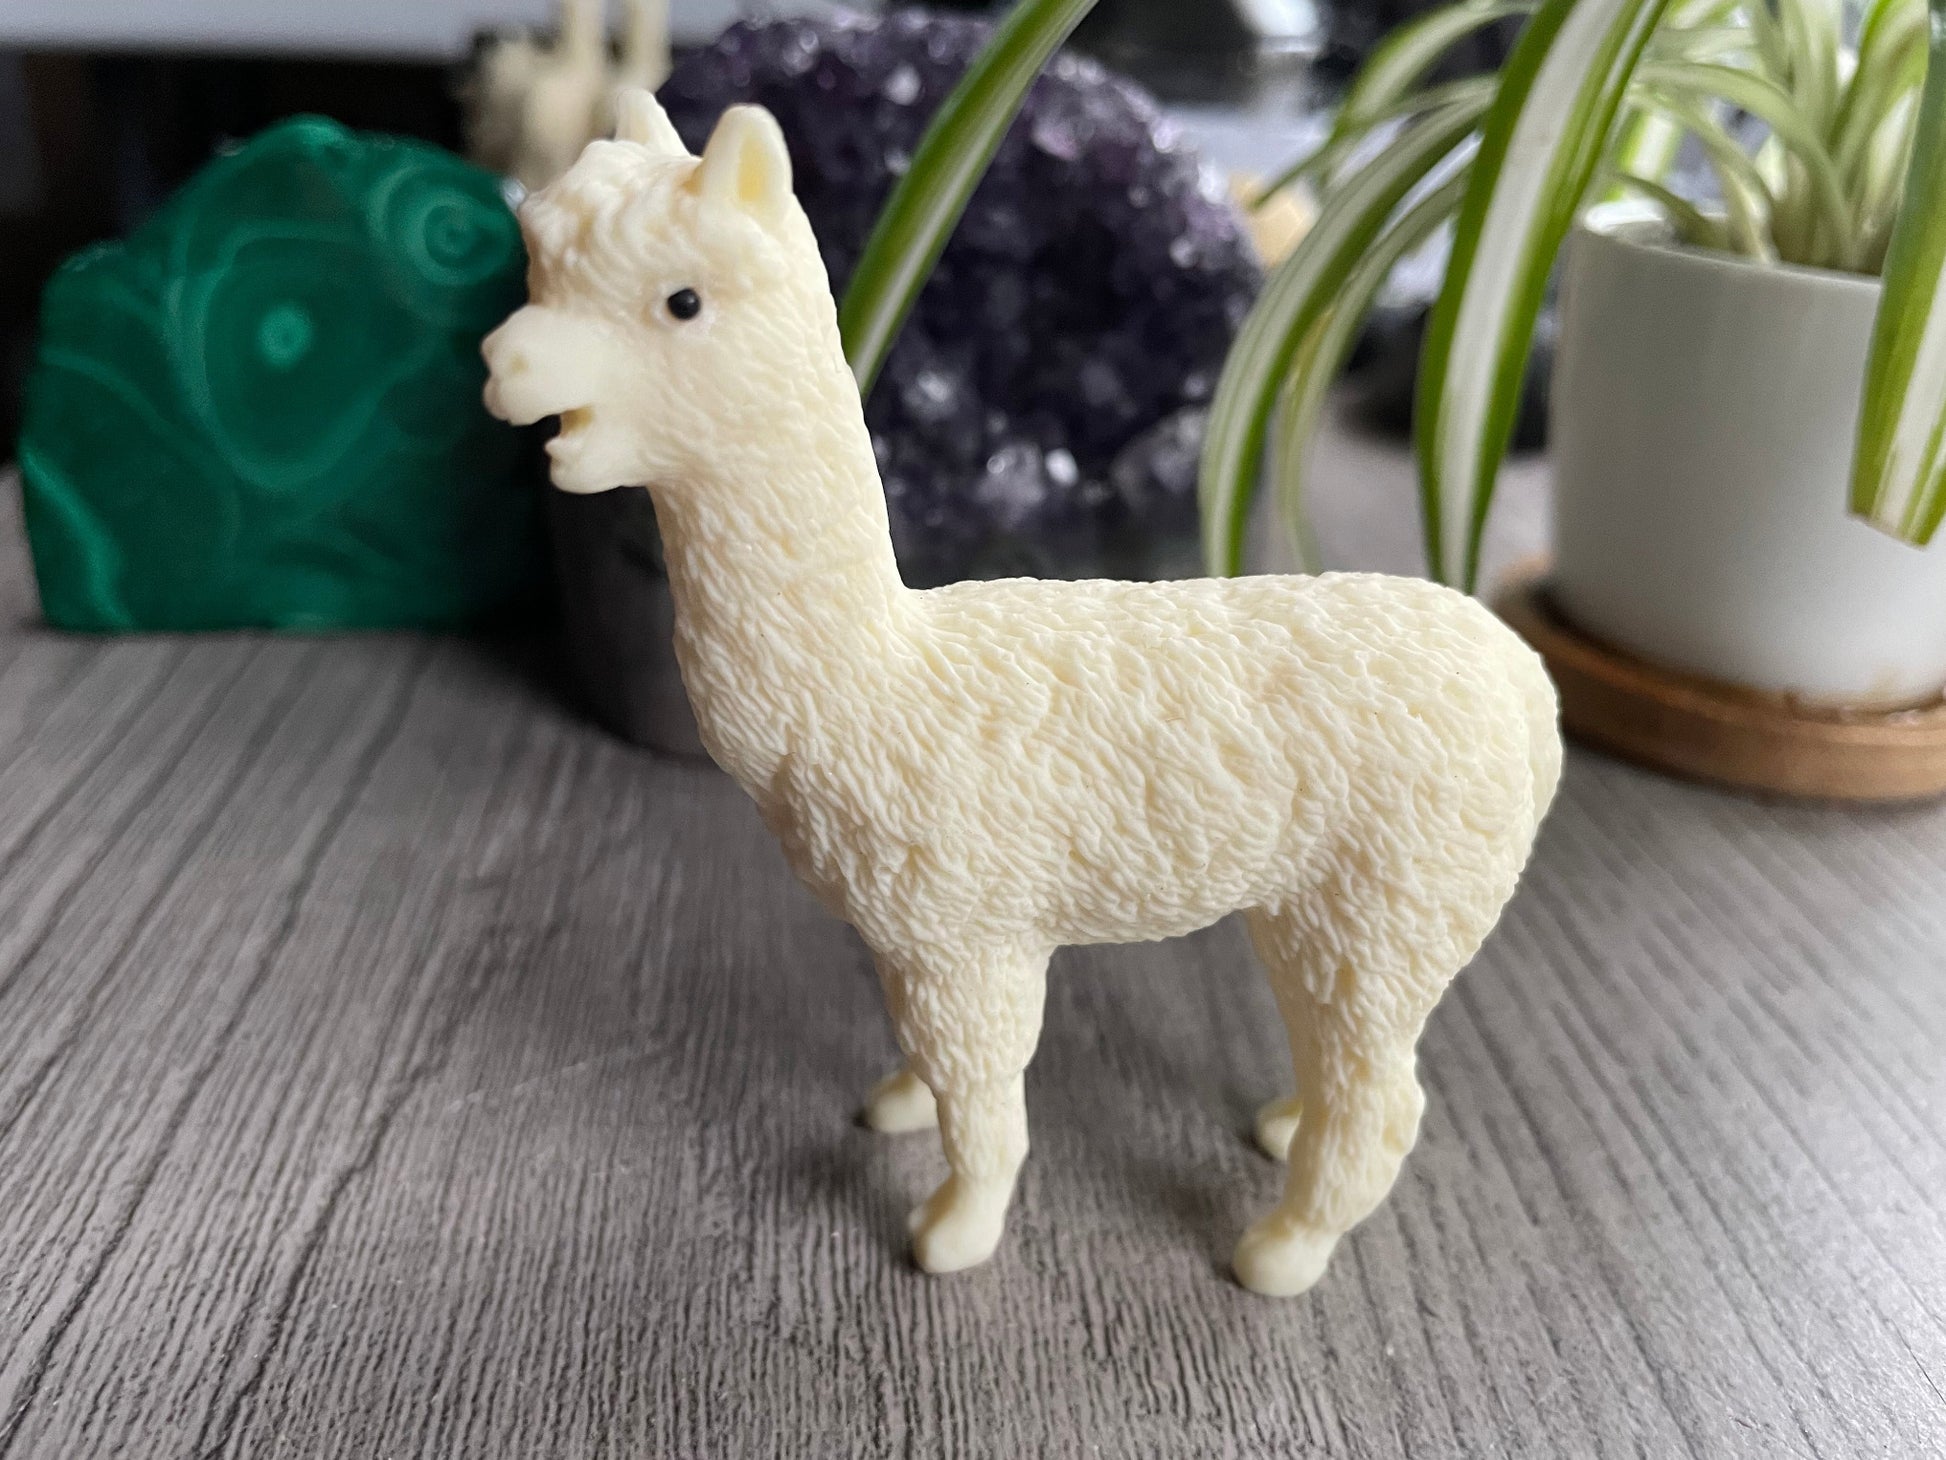 Pictured is an alpaca or llama carved out of tagua nut.